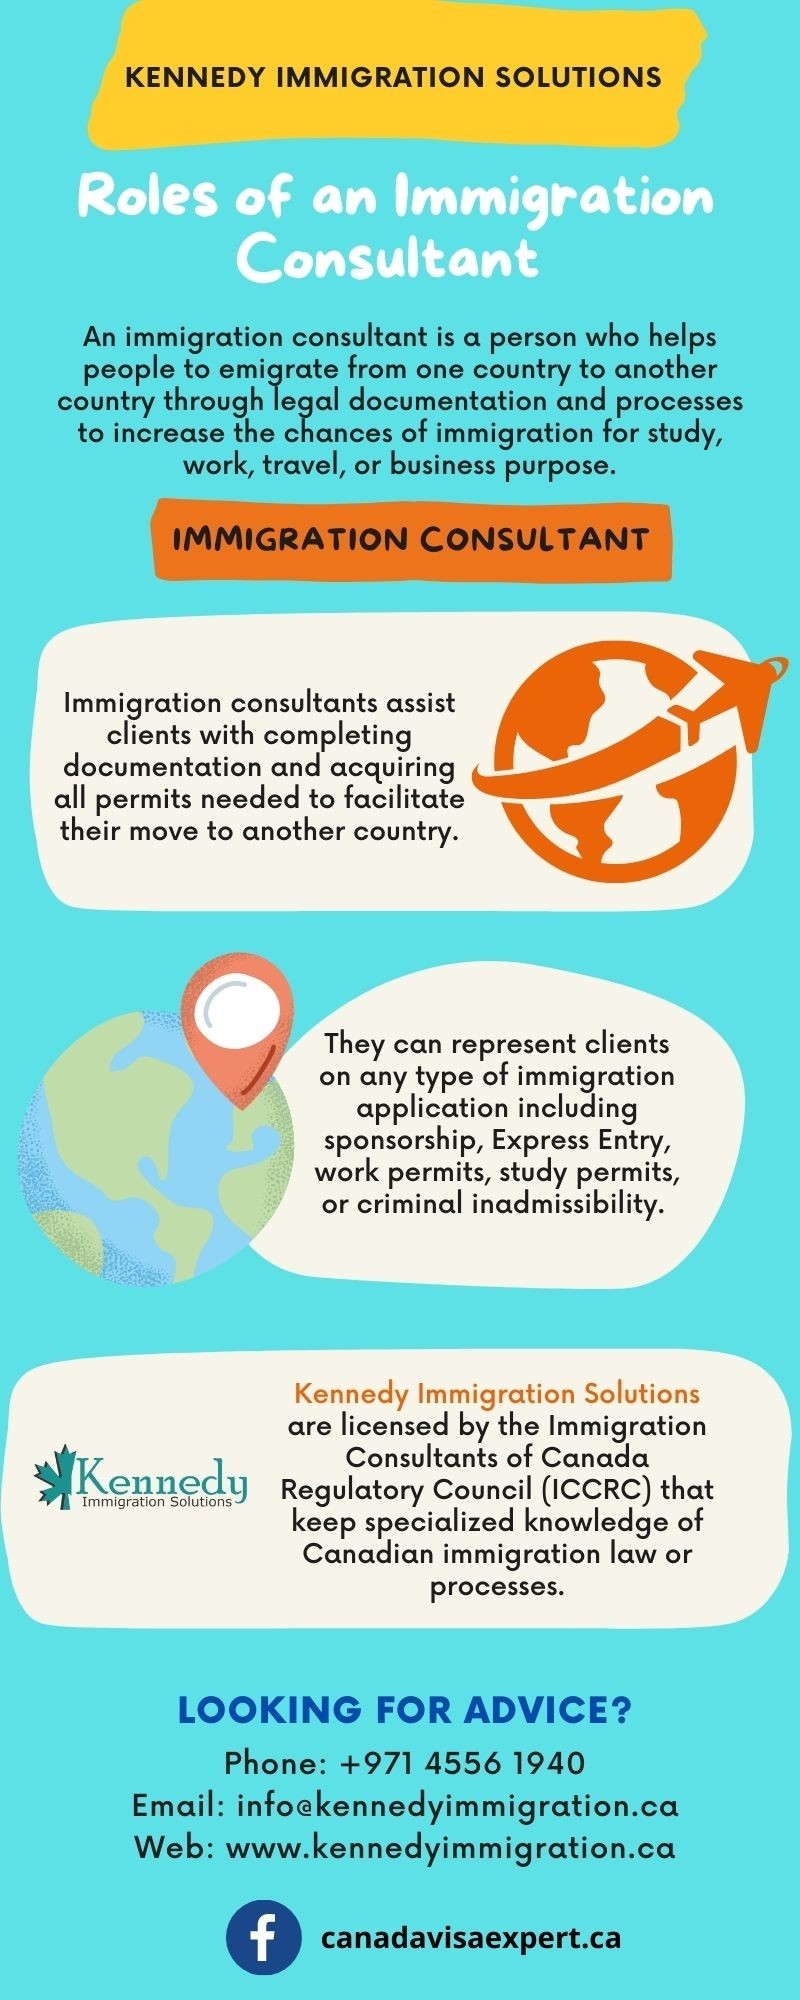 Roles of an immigration Consultant - Kennedy Immigration Solutions